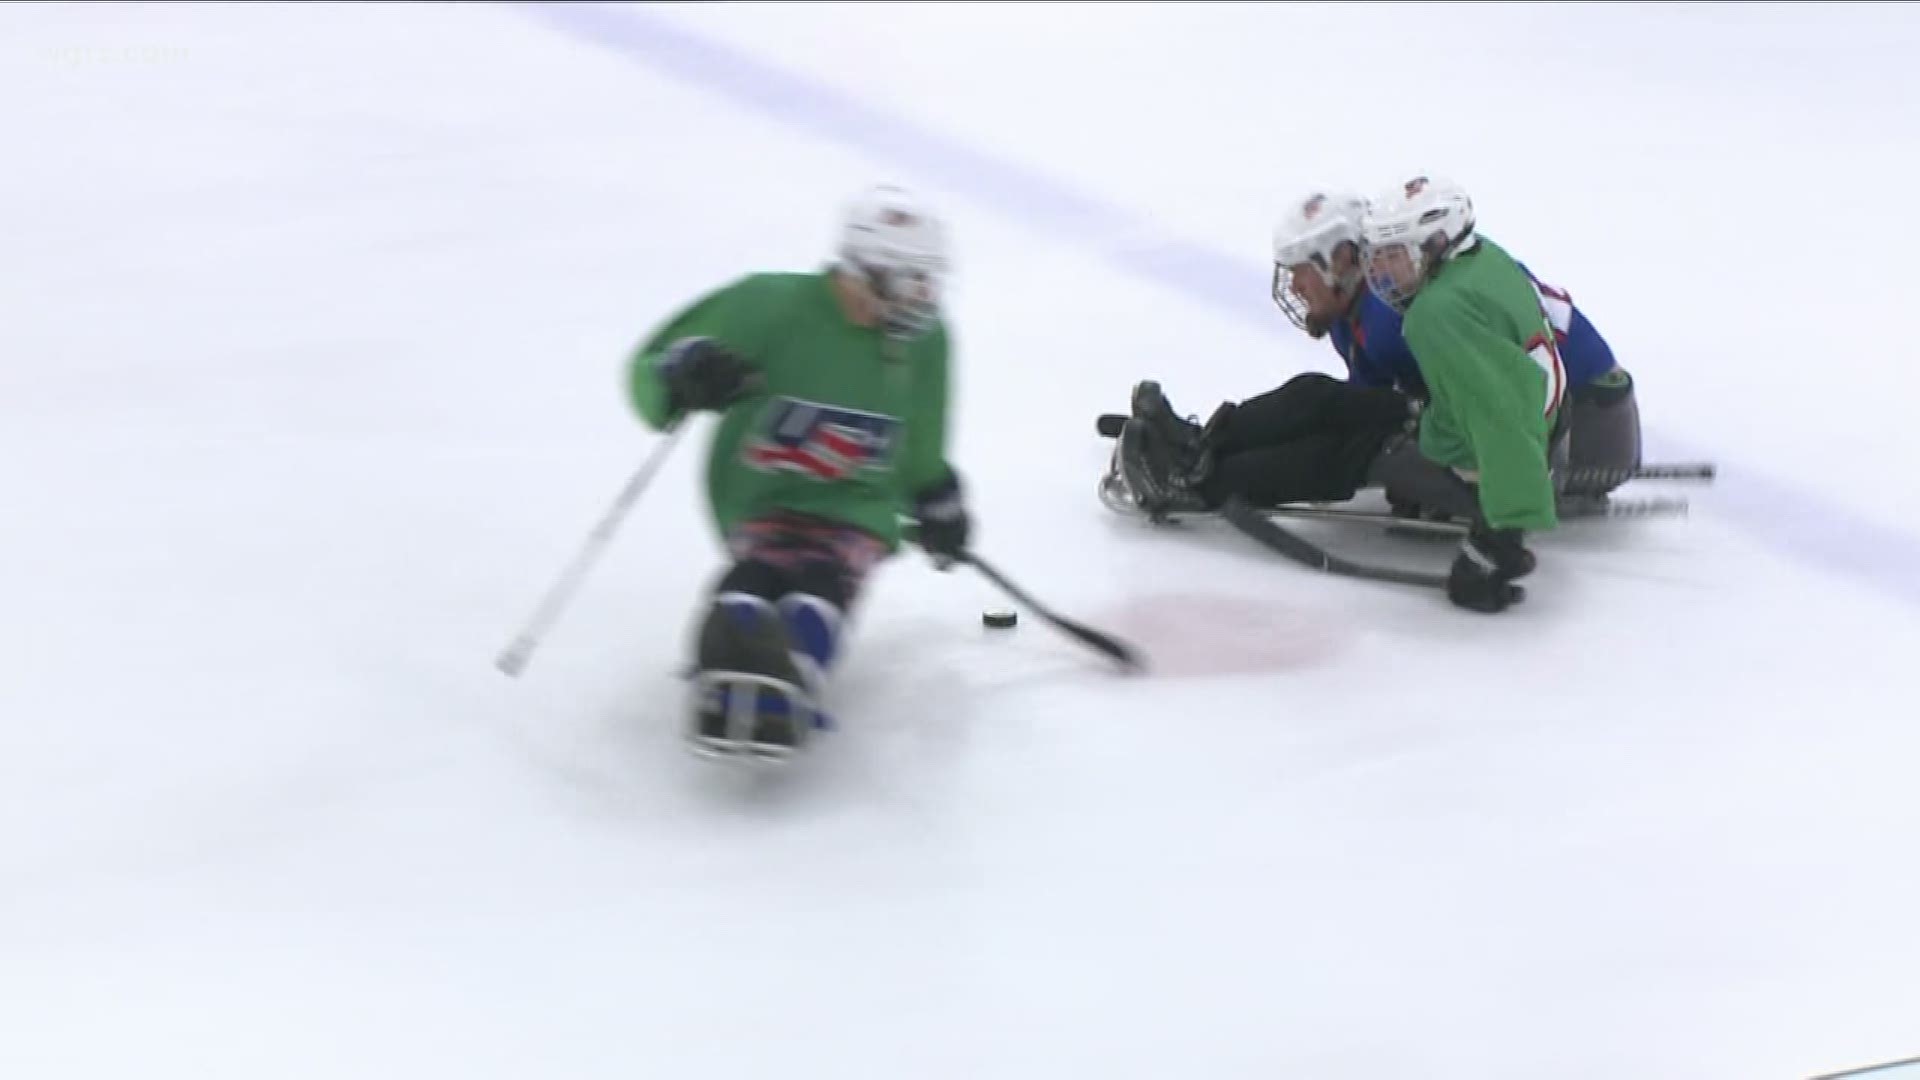 Sled Hockey Tryouts and Growing Popularity